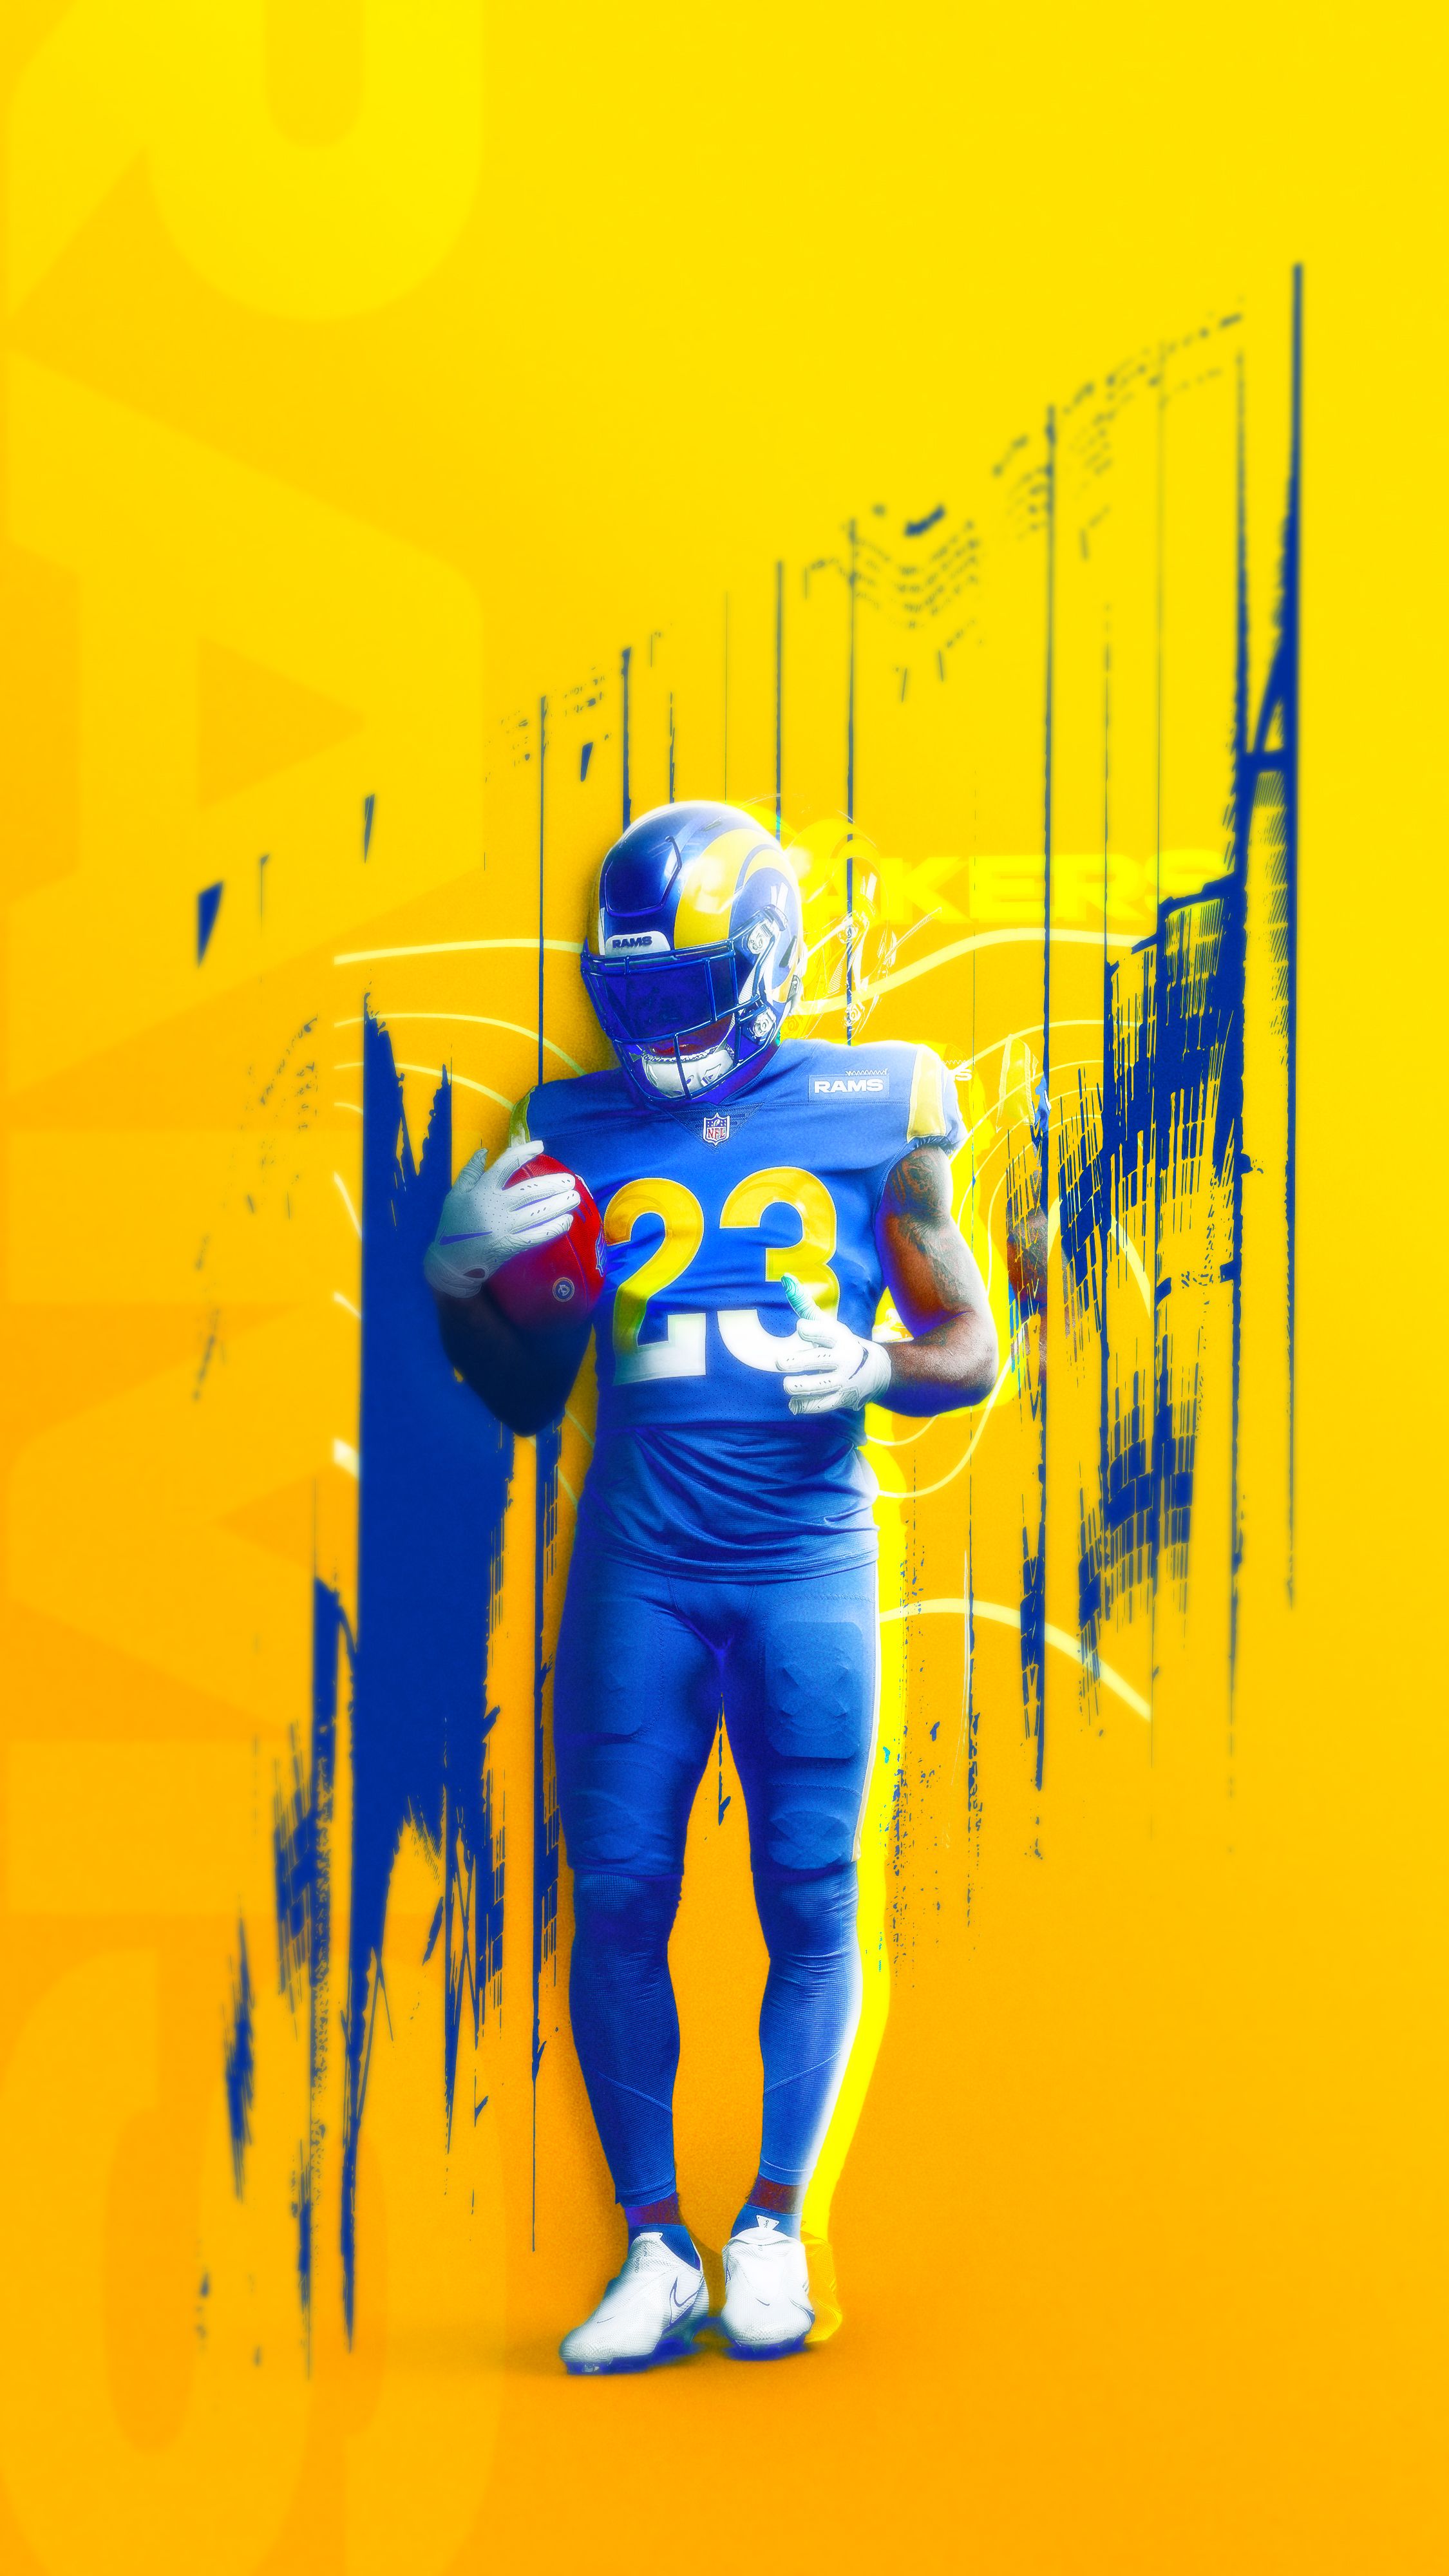 Free download Rams Wallpaper Los Angeles Rams theramscom [2250x4000] for your Desktop, Mobile & Tablet. Explore Rams Wallpaper. LA Rams Wallpaper, Rams Desktop Wallpaper, LA Rams Wallpaper